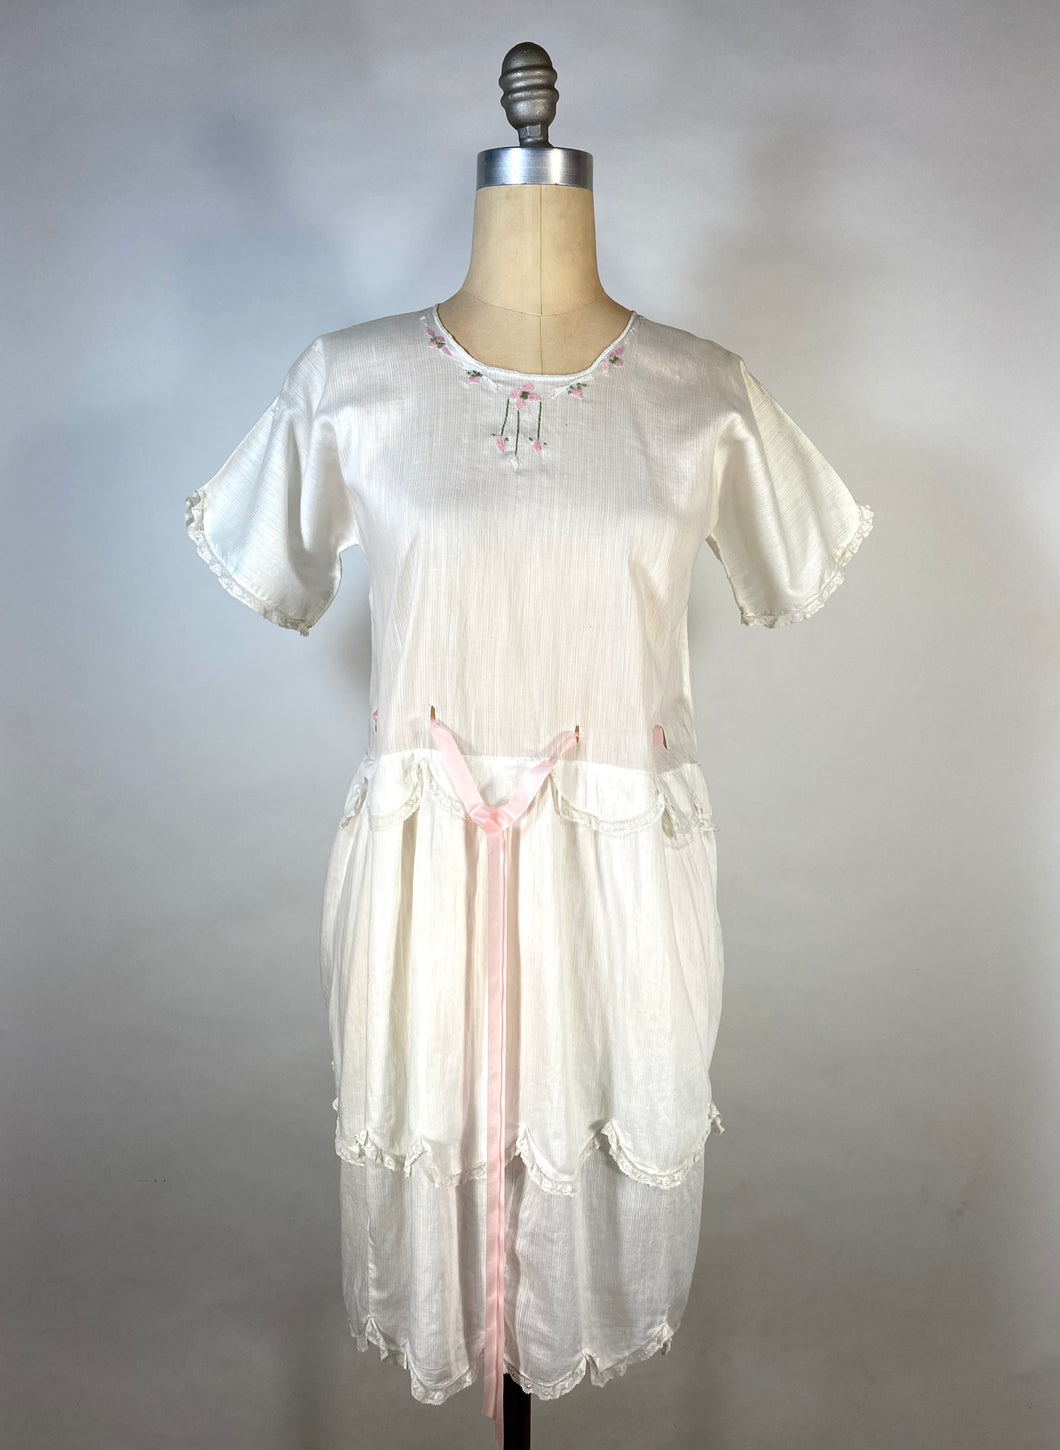 1920's 20s UNIQUE dress with embroidery, lace and scallop edging size Extra Small- Small